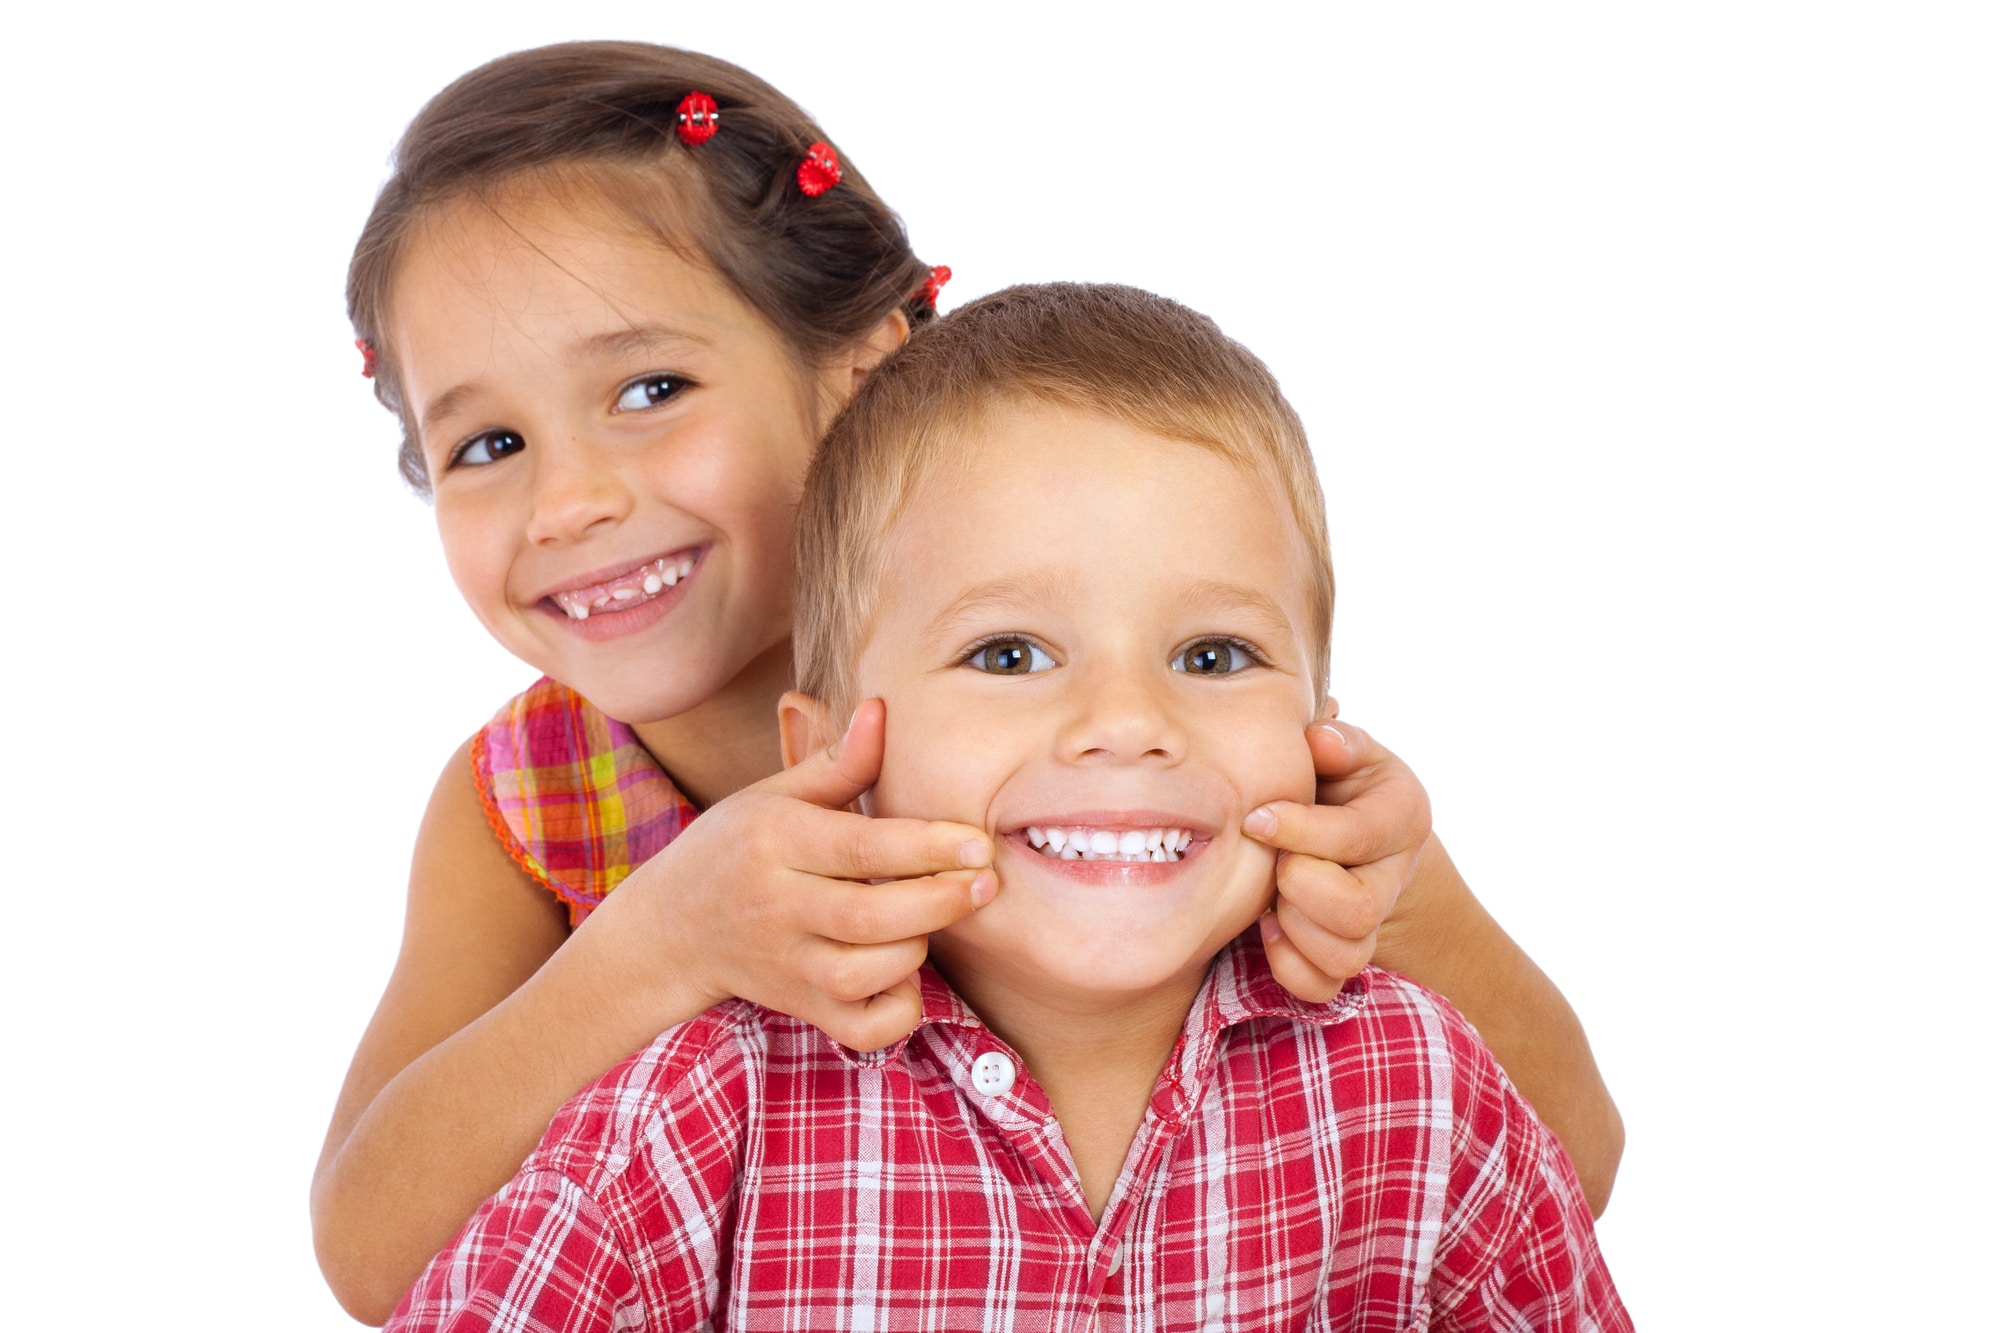 Training your child how to take care of their teeth and gums.